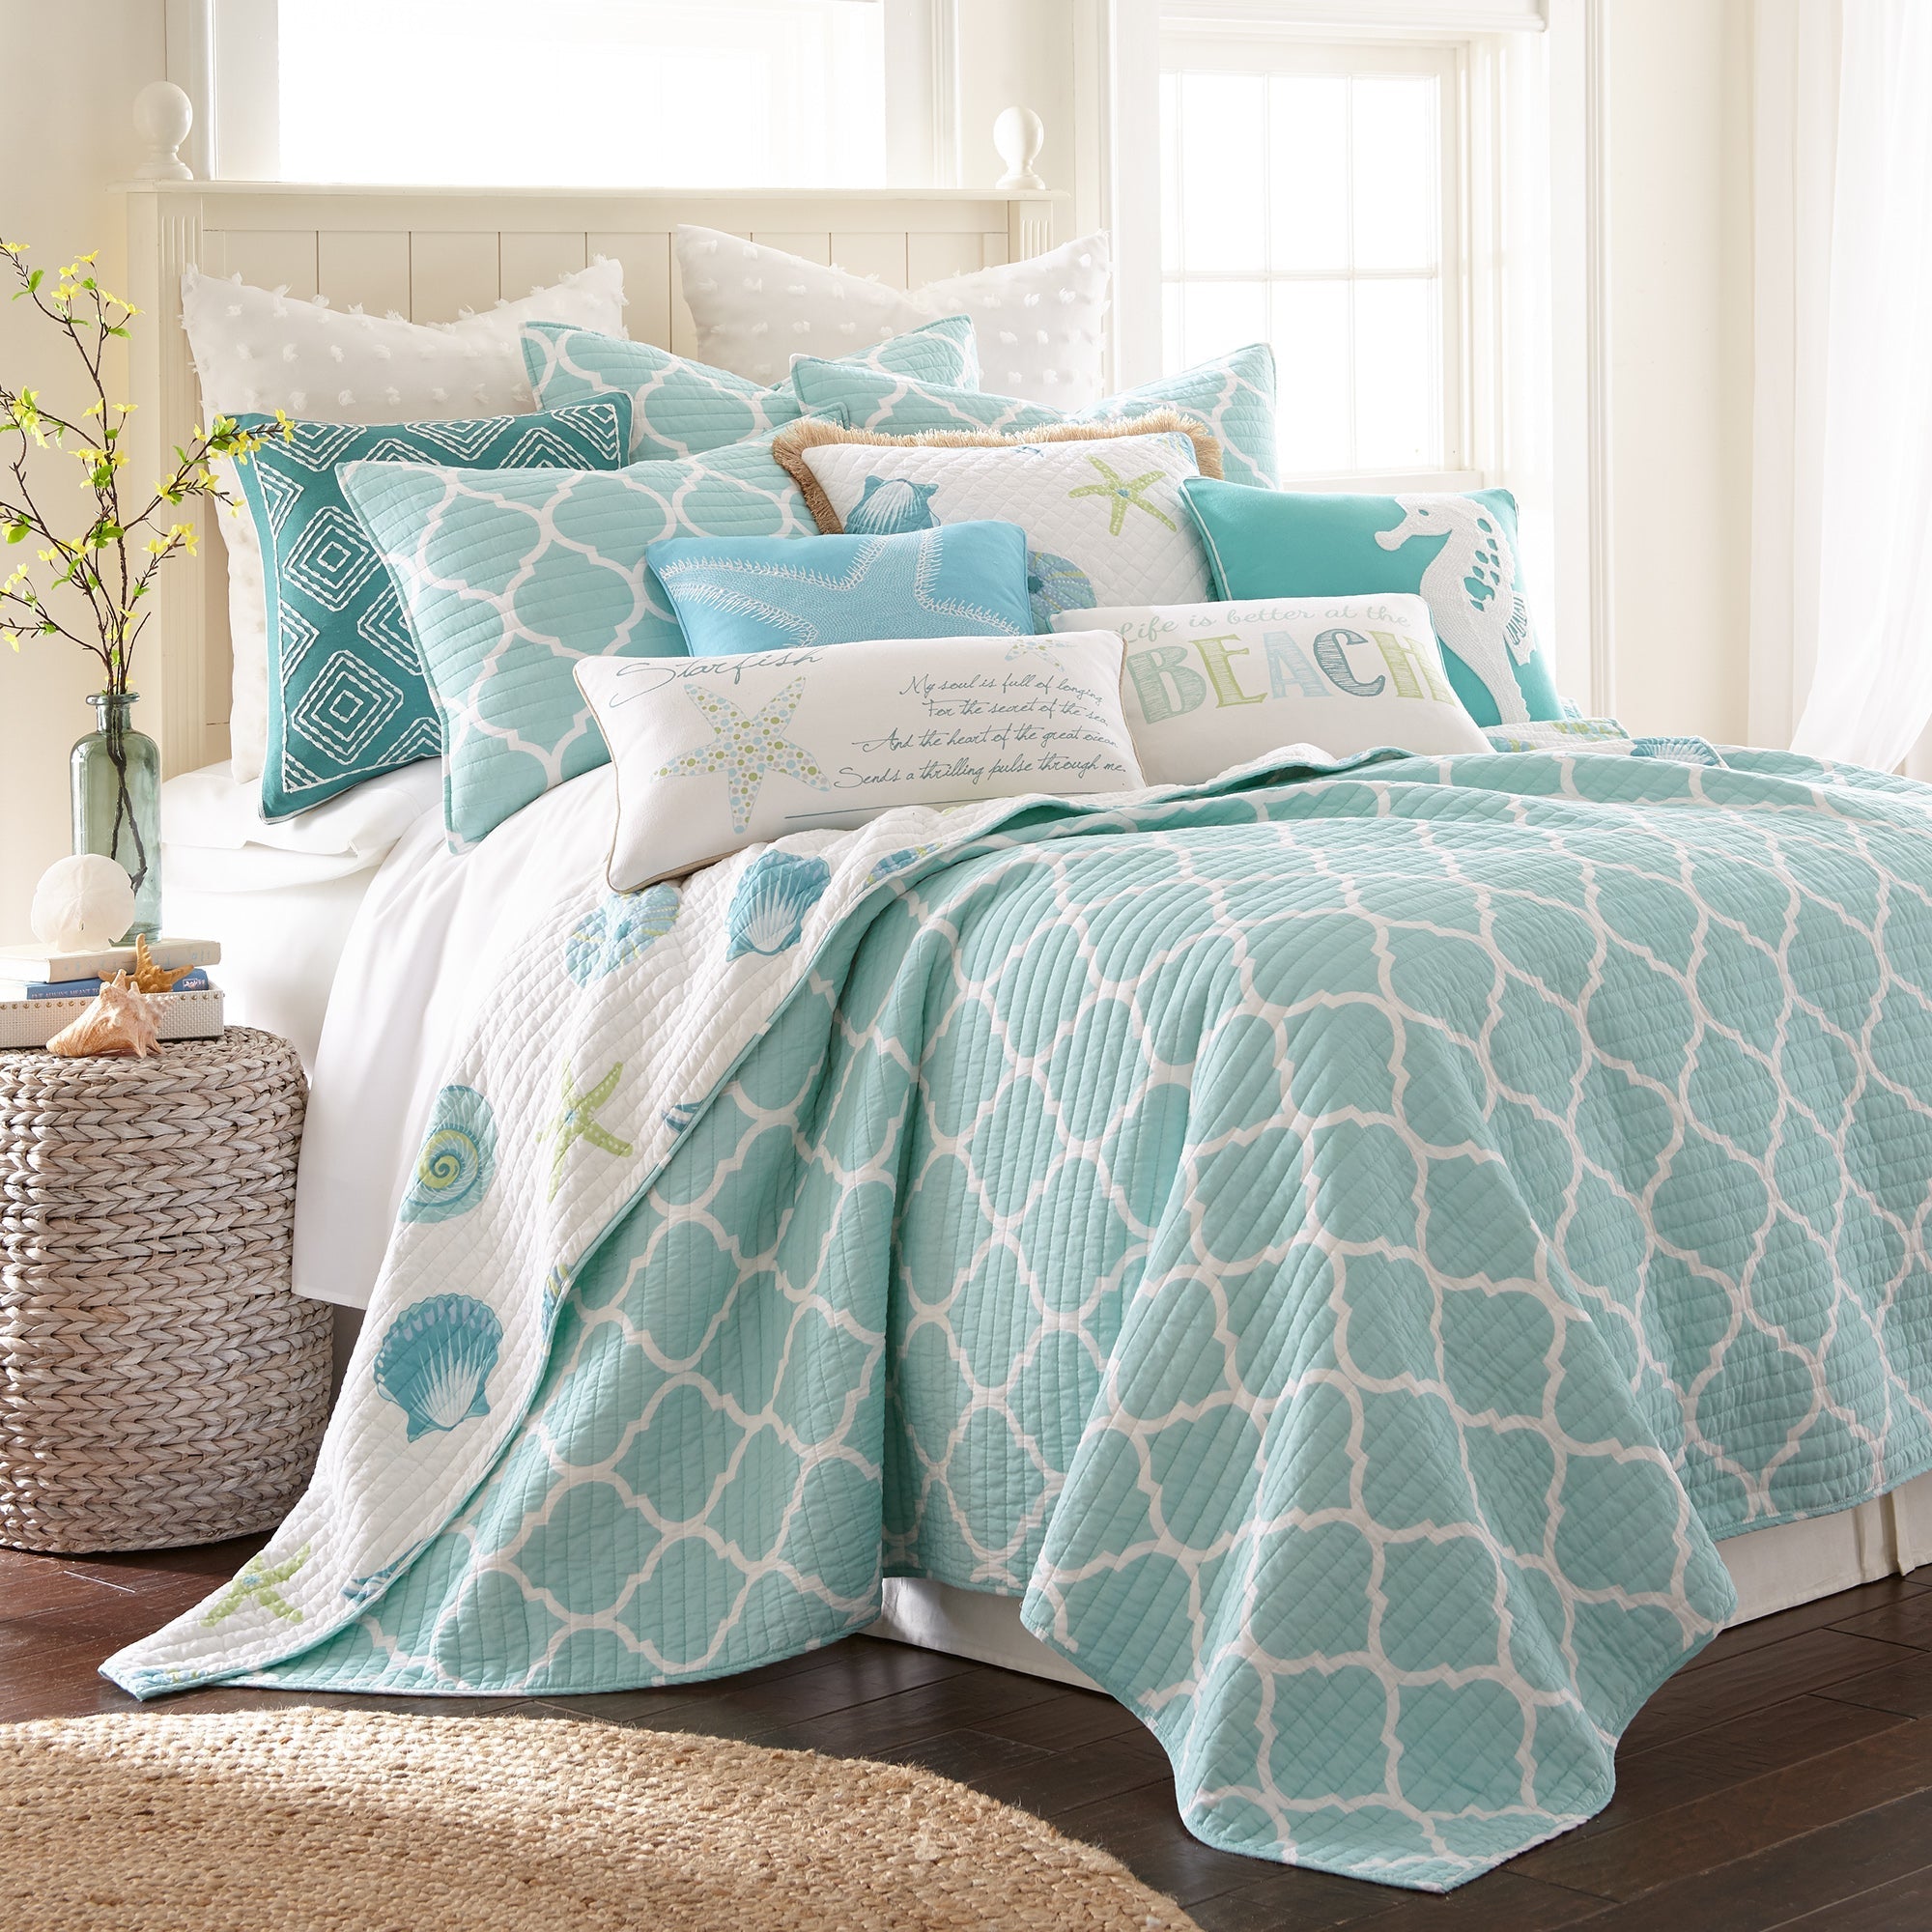 Del Ray Teal Crewel Stitch Pillow